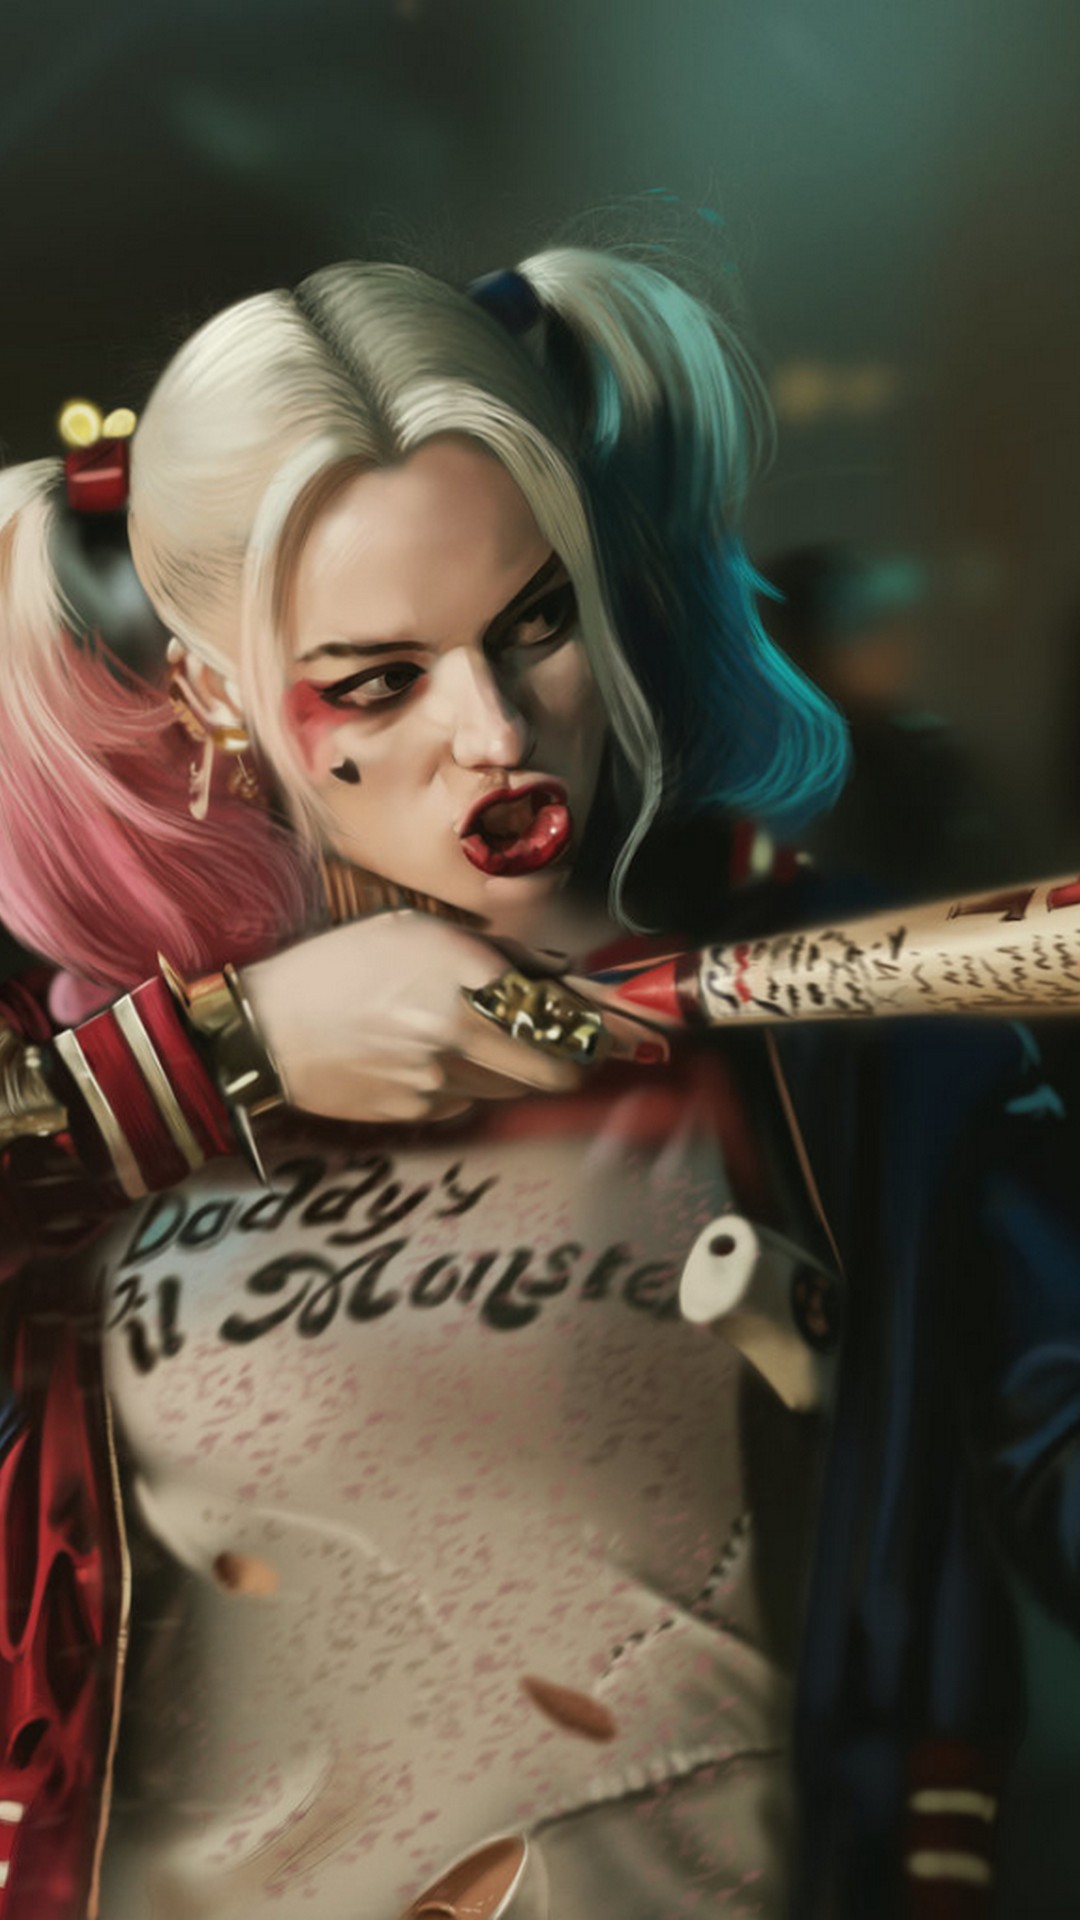 Wallpaper Harley Quinn Makeup Iphone With Image Resolution - Iphone Wallpaper Harley Quinn - HD Wallpaper 